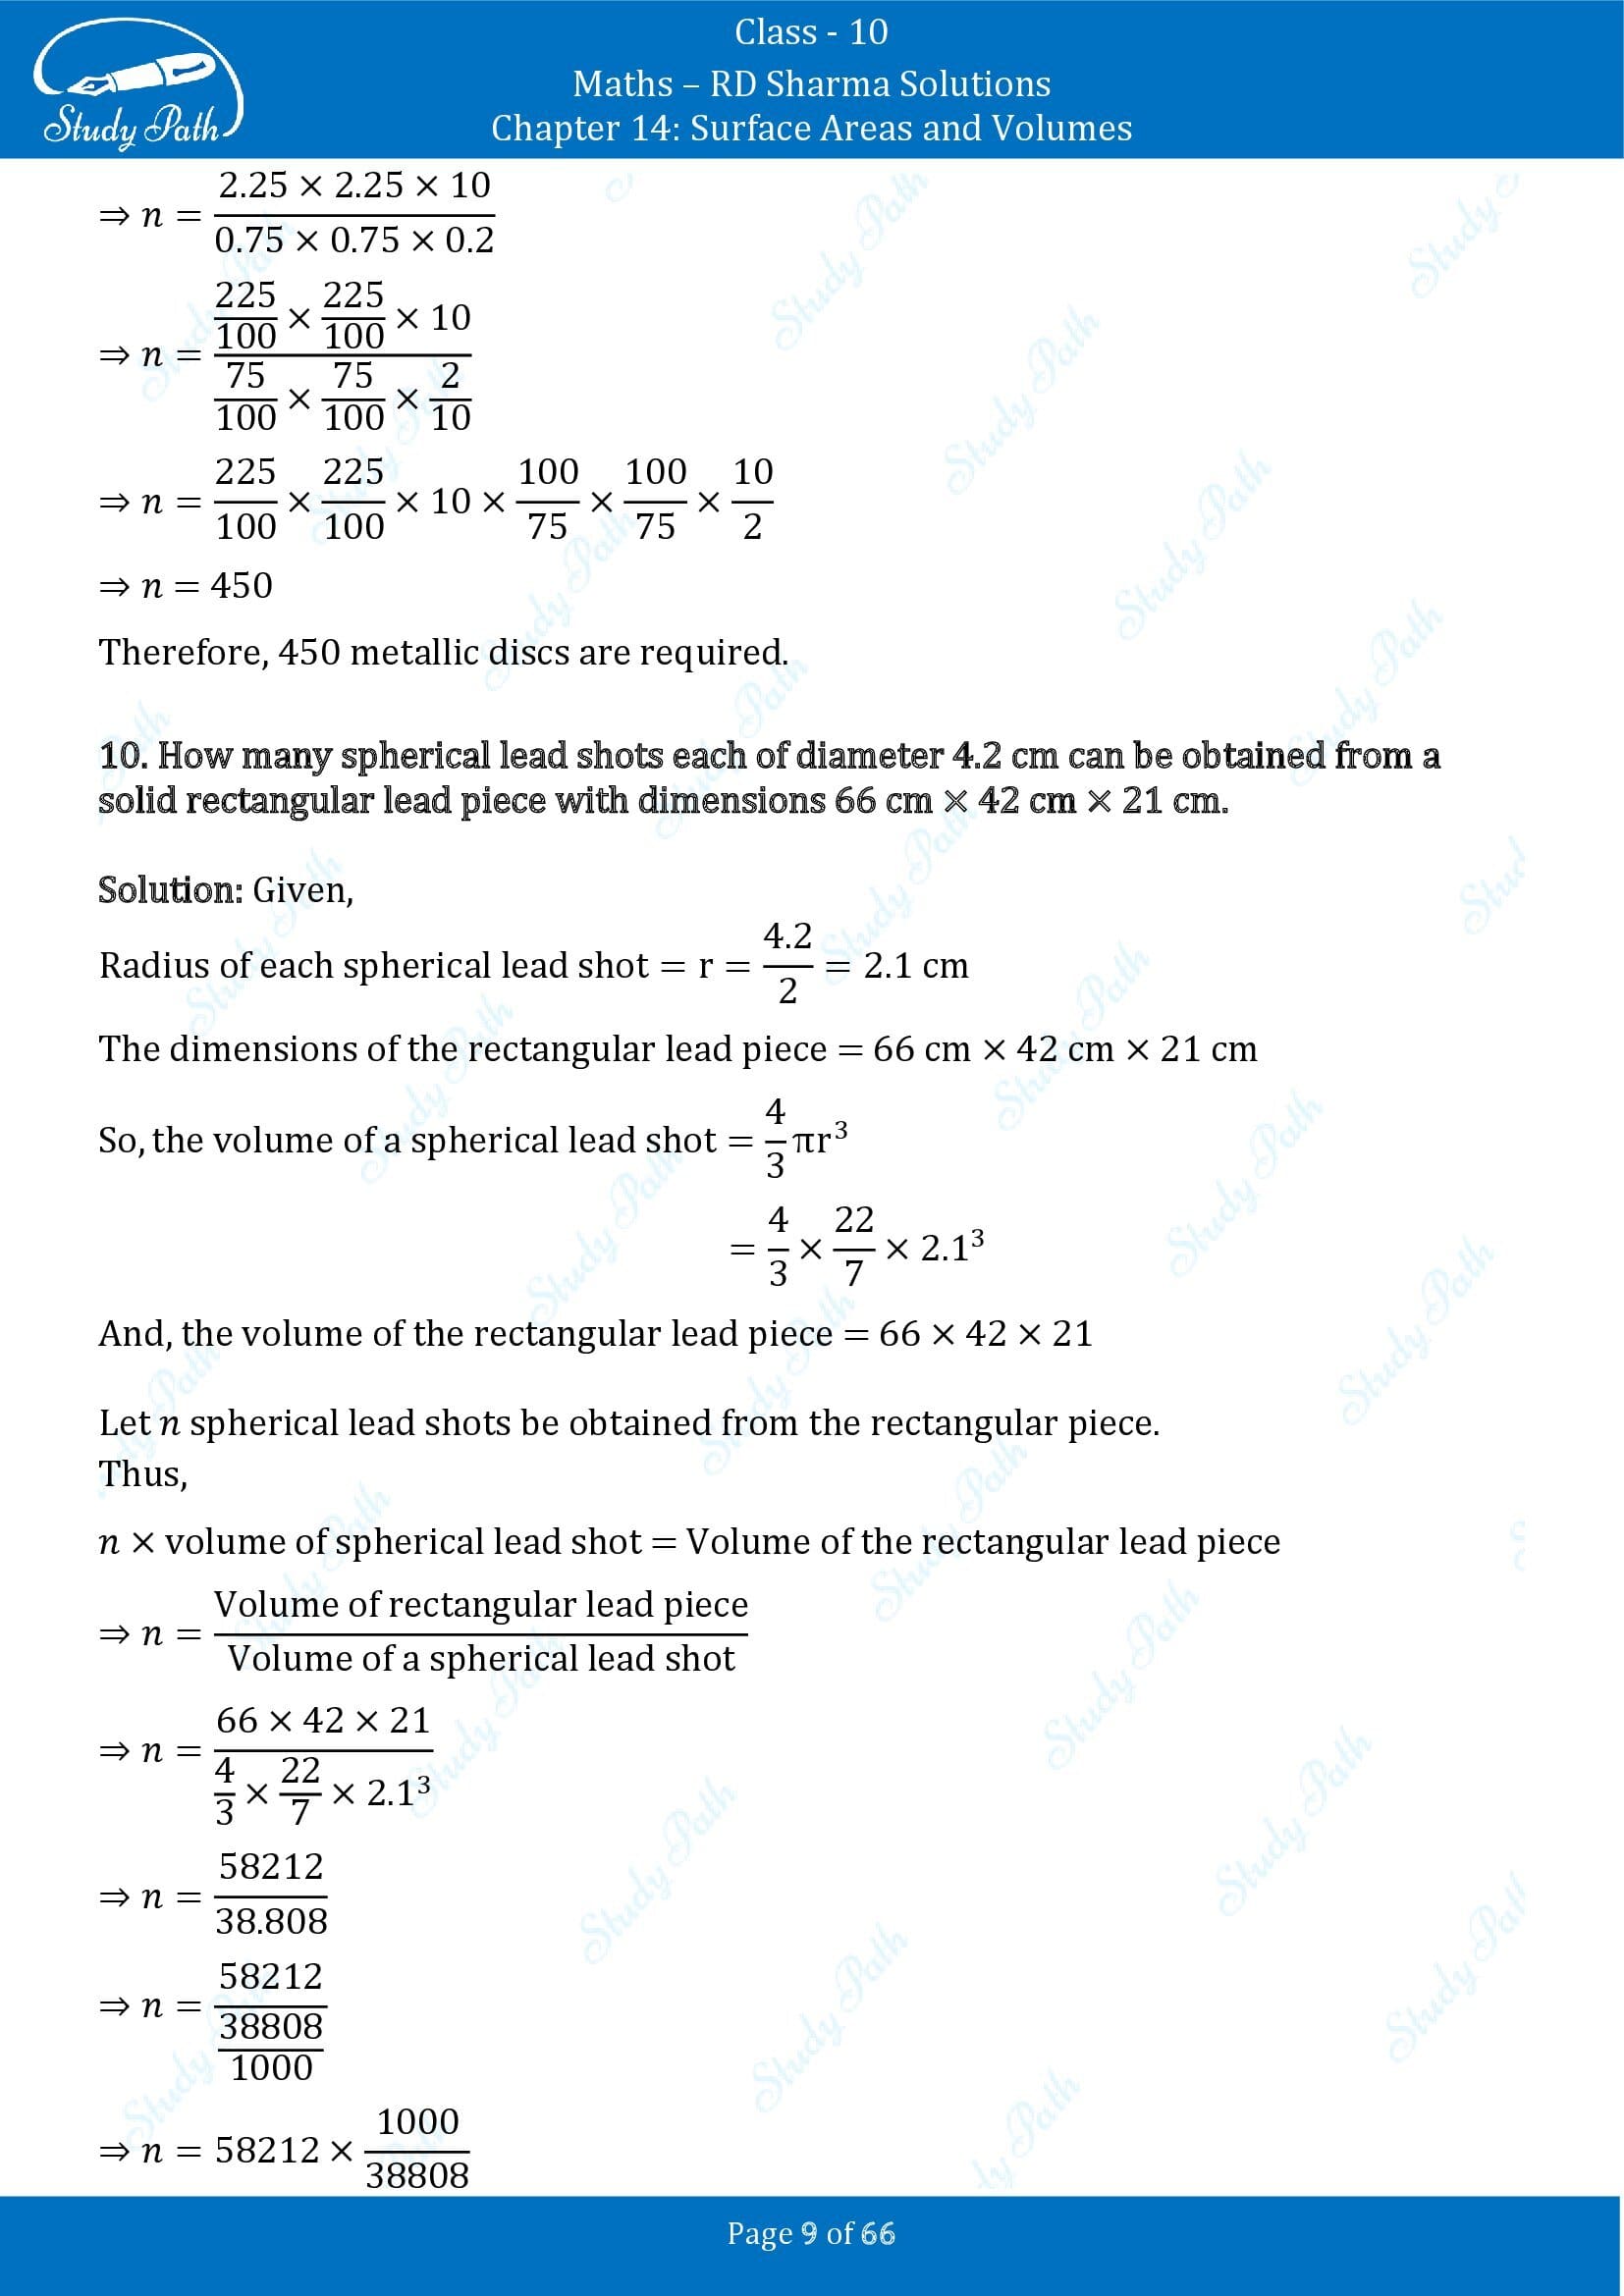 RD Sharma Solutions Class 10 Chapter 14 Surface Areas and Volumes Exercise 14.1 00009